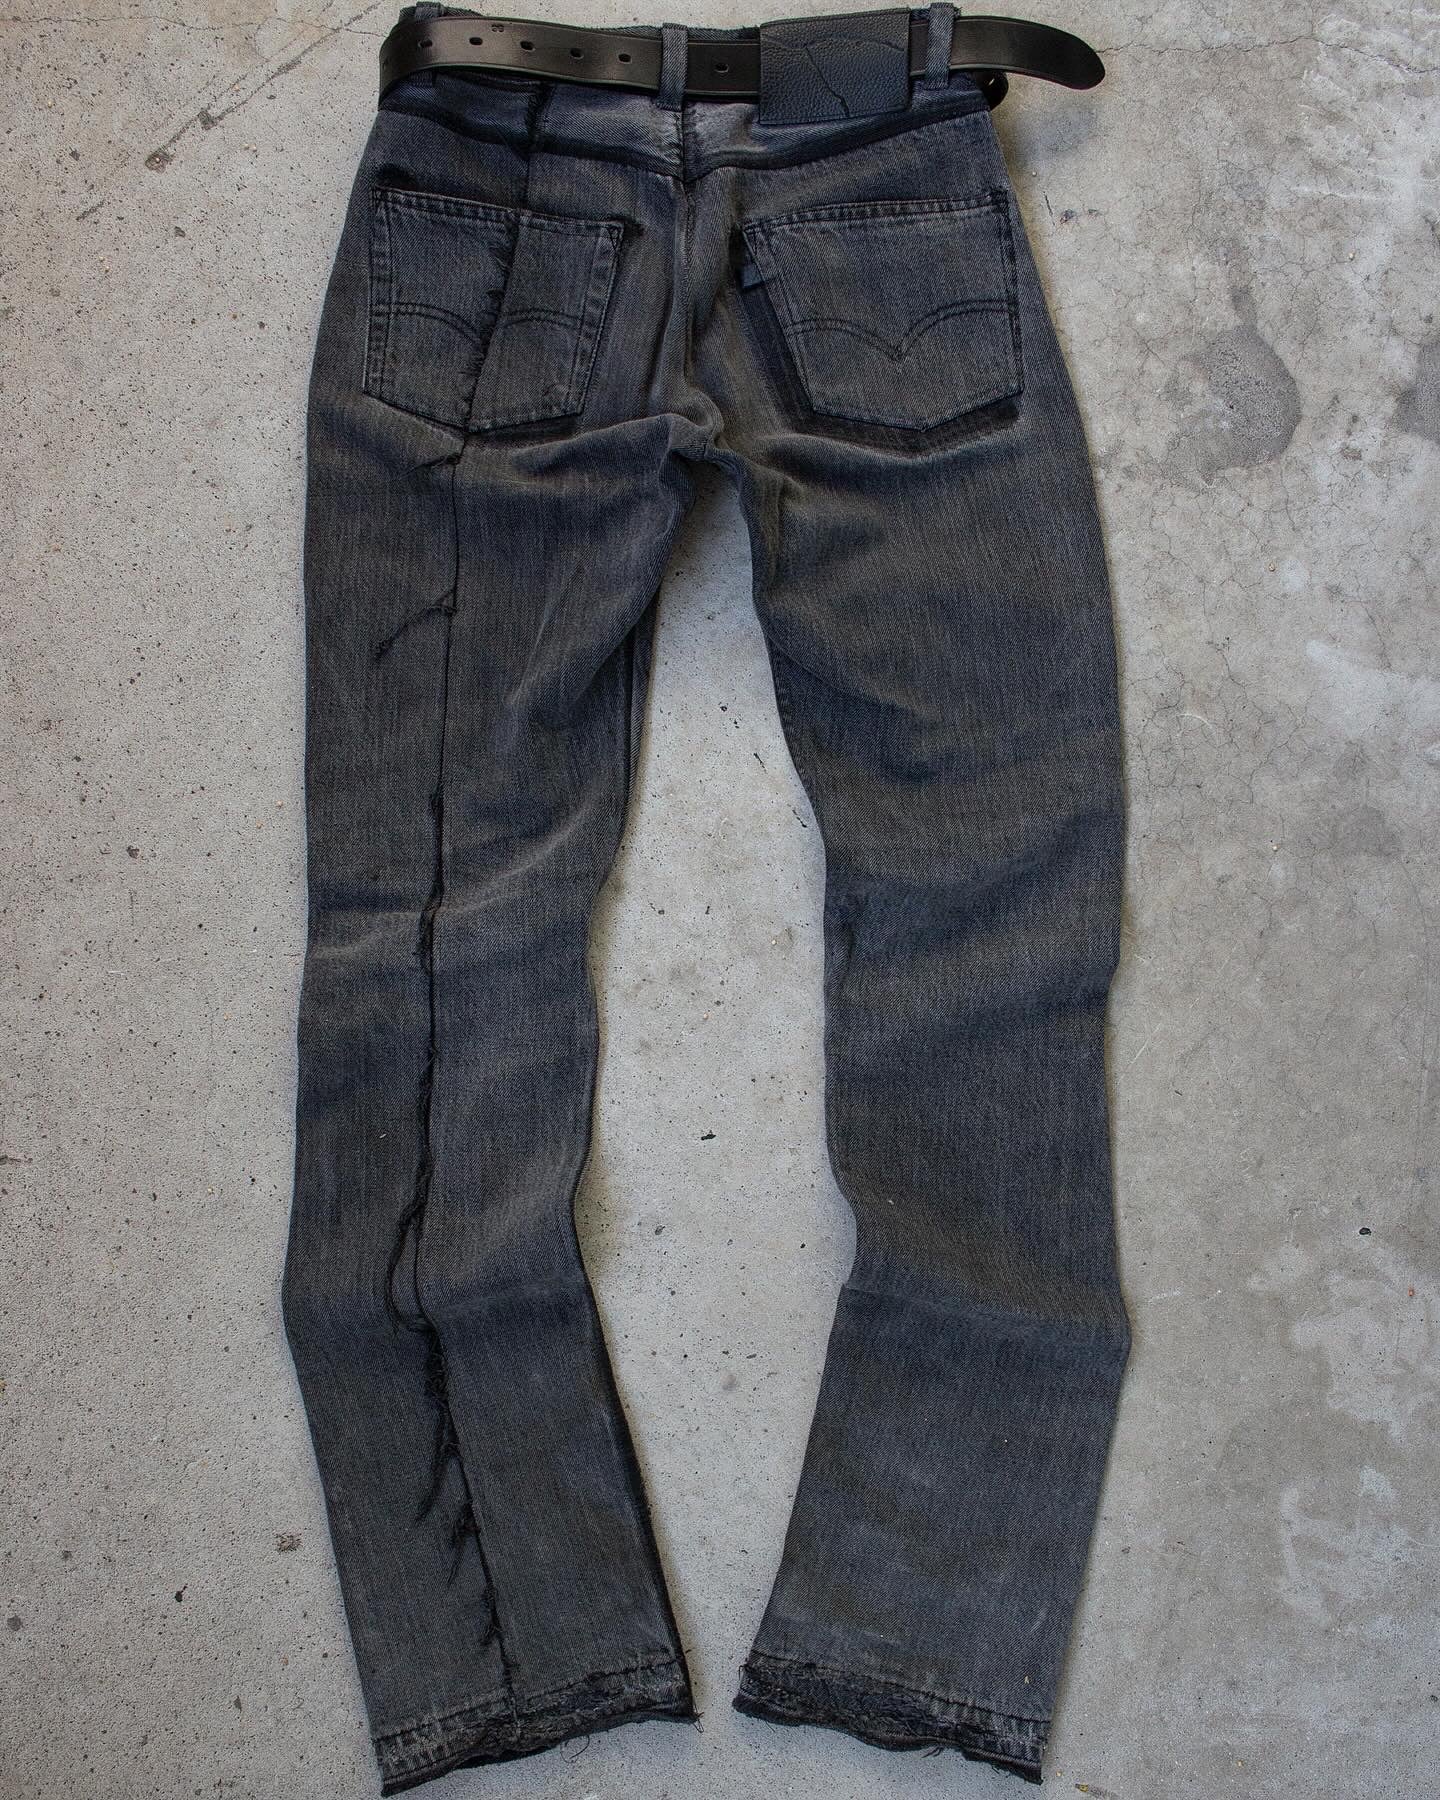 Unsound Rags 1/60 Charcoal Grey Reconstructed Denim